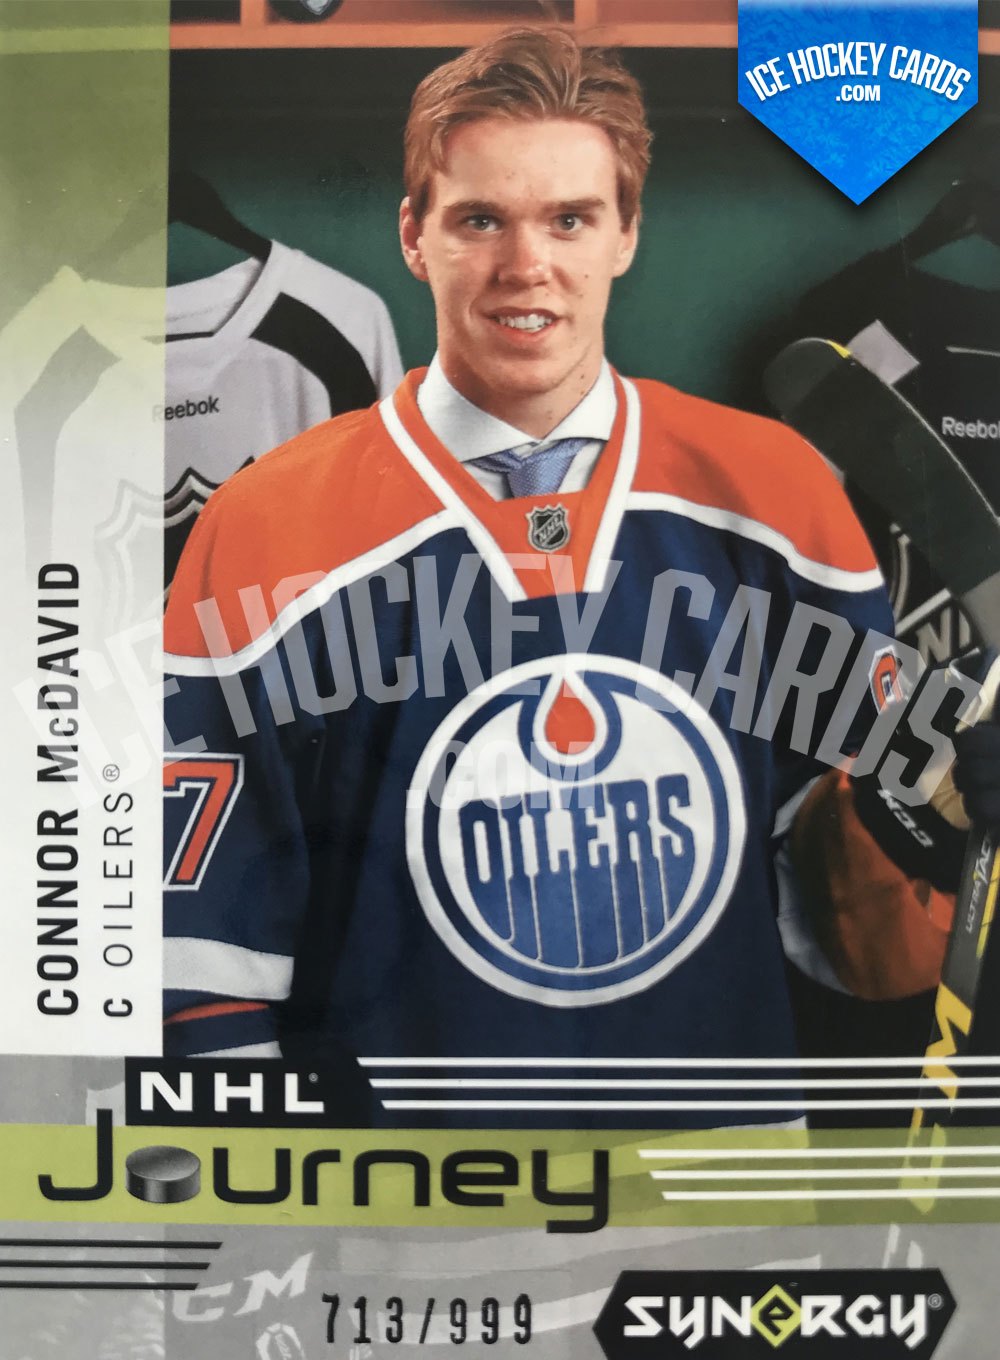 Upper Deck resigns NHL star Connor McDavid to exclusive collectibles deal -  Sports Collectors Digest